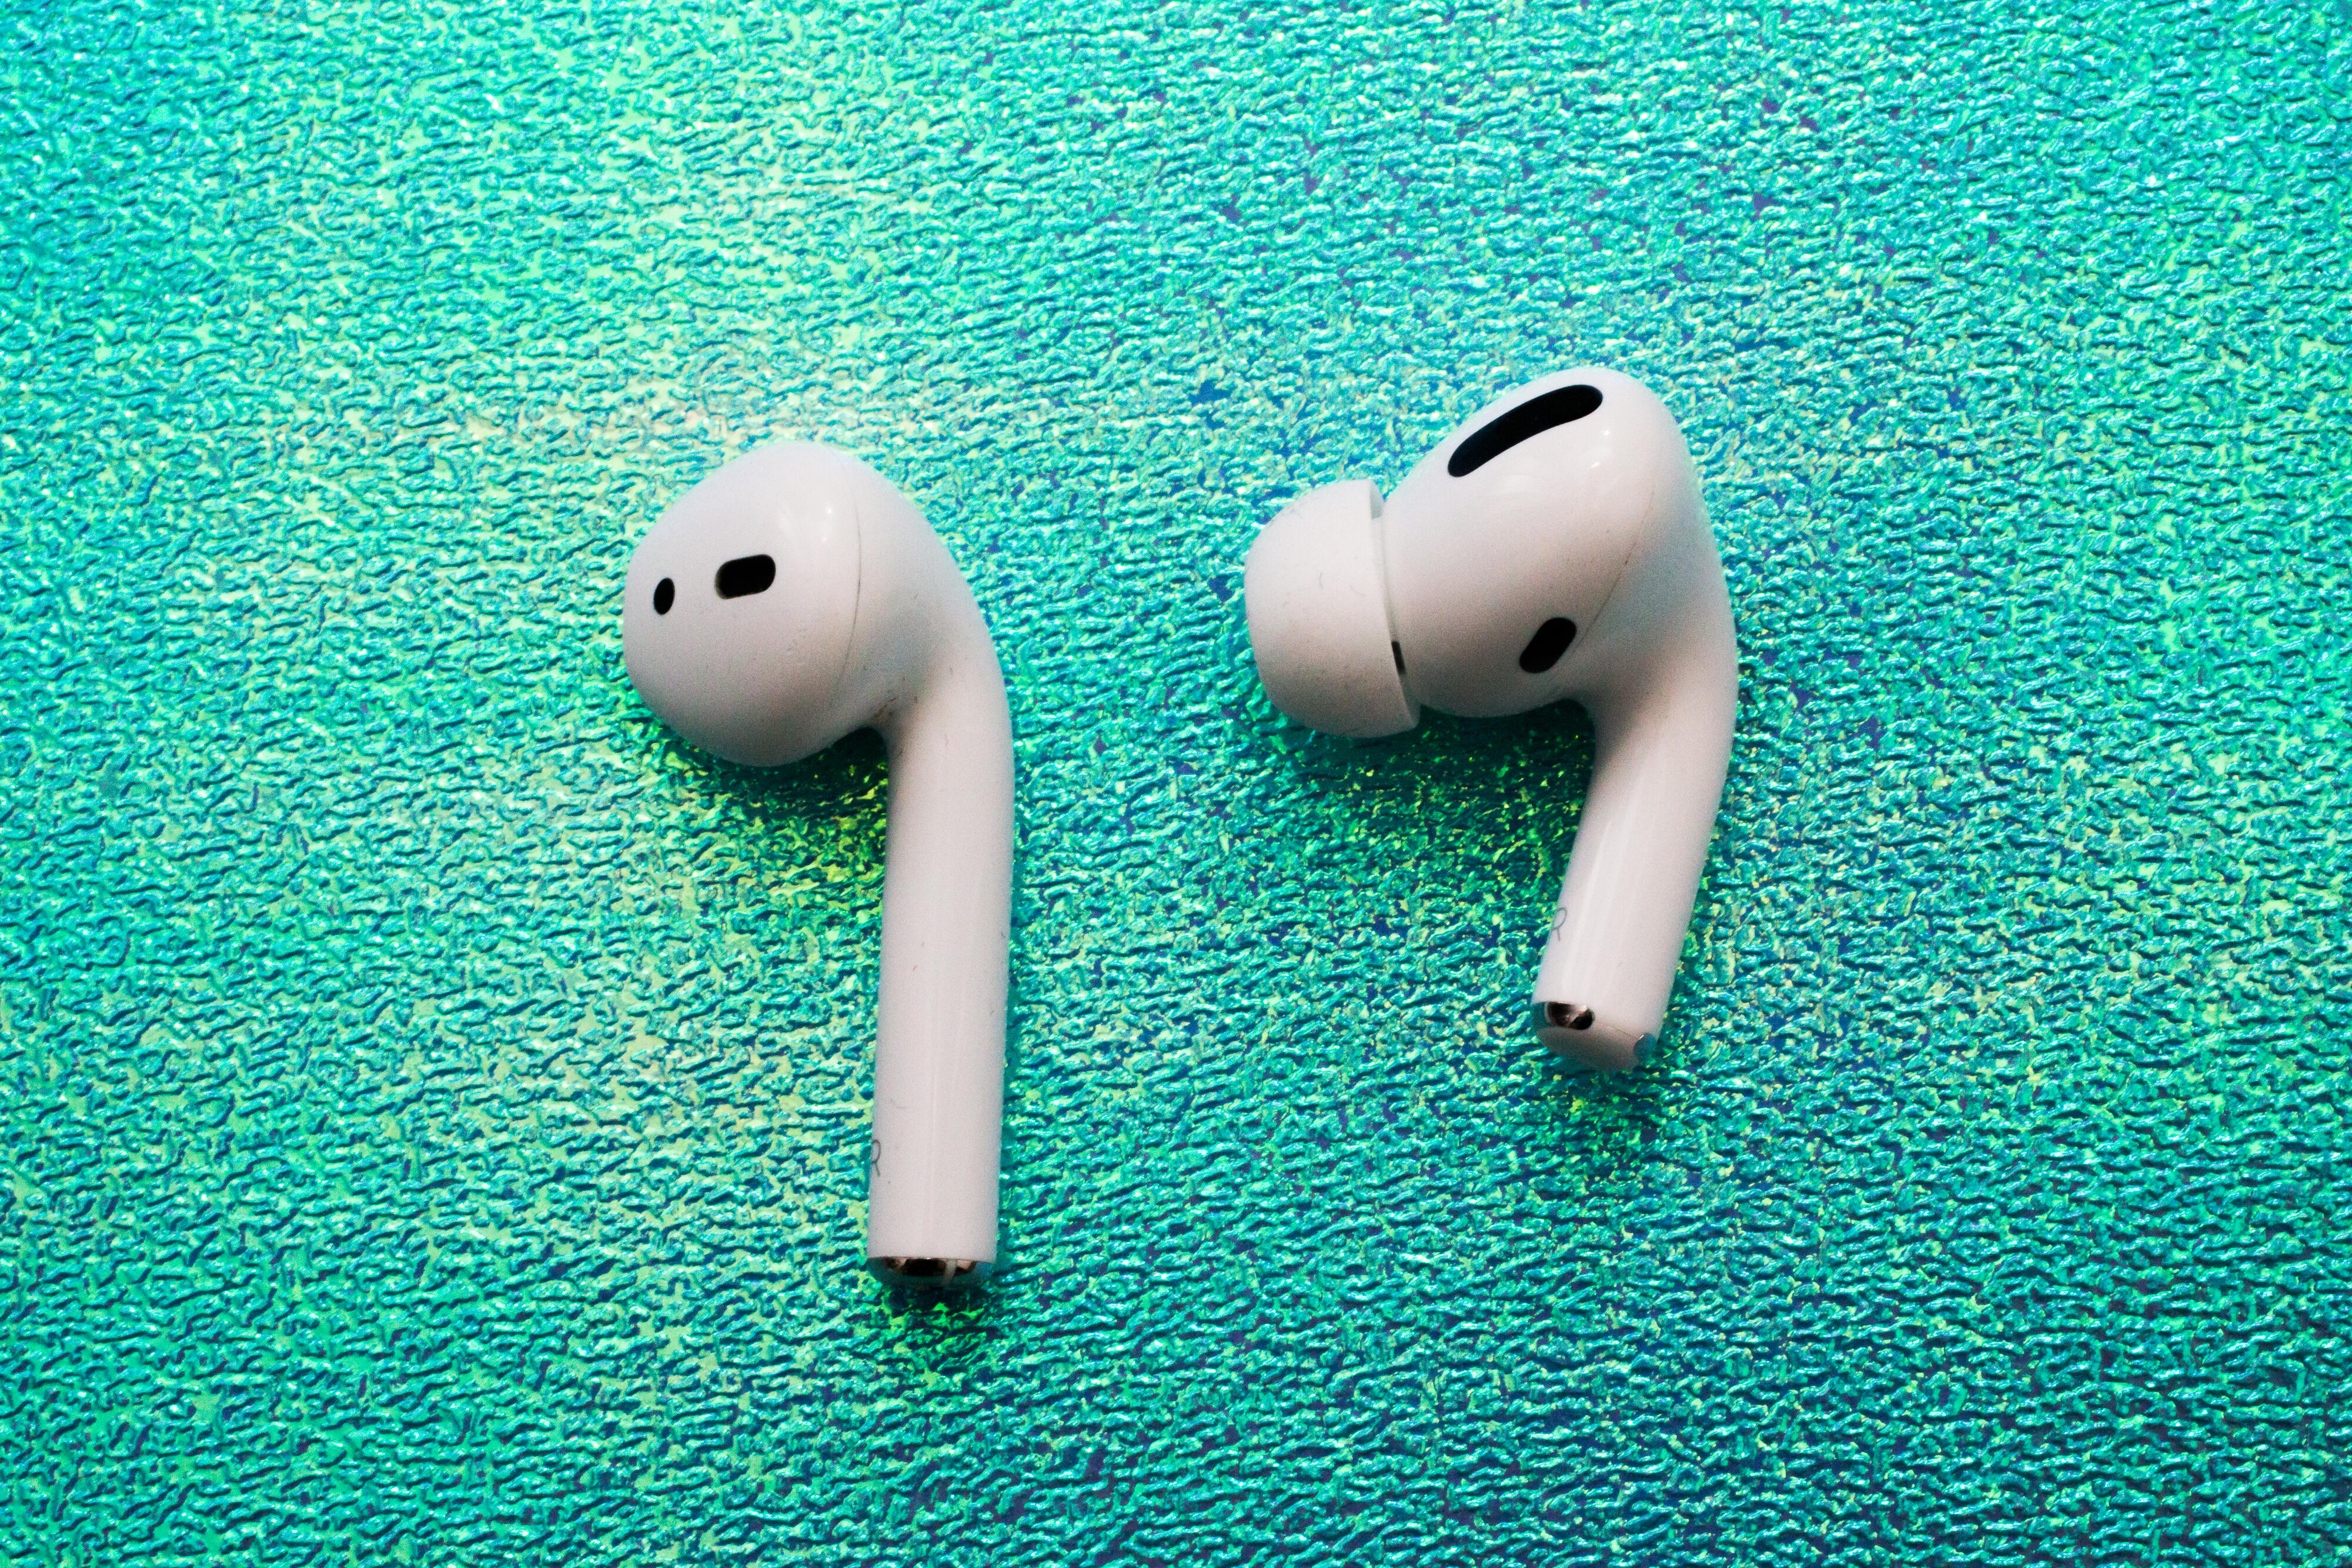 Airpods маркет. Аирпод 3. Apple AIRPODS. AIRPODS Pro 3. AIRPODS 3rd Generation.